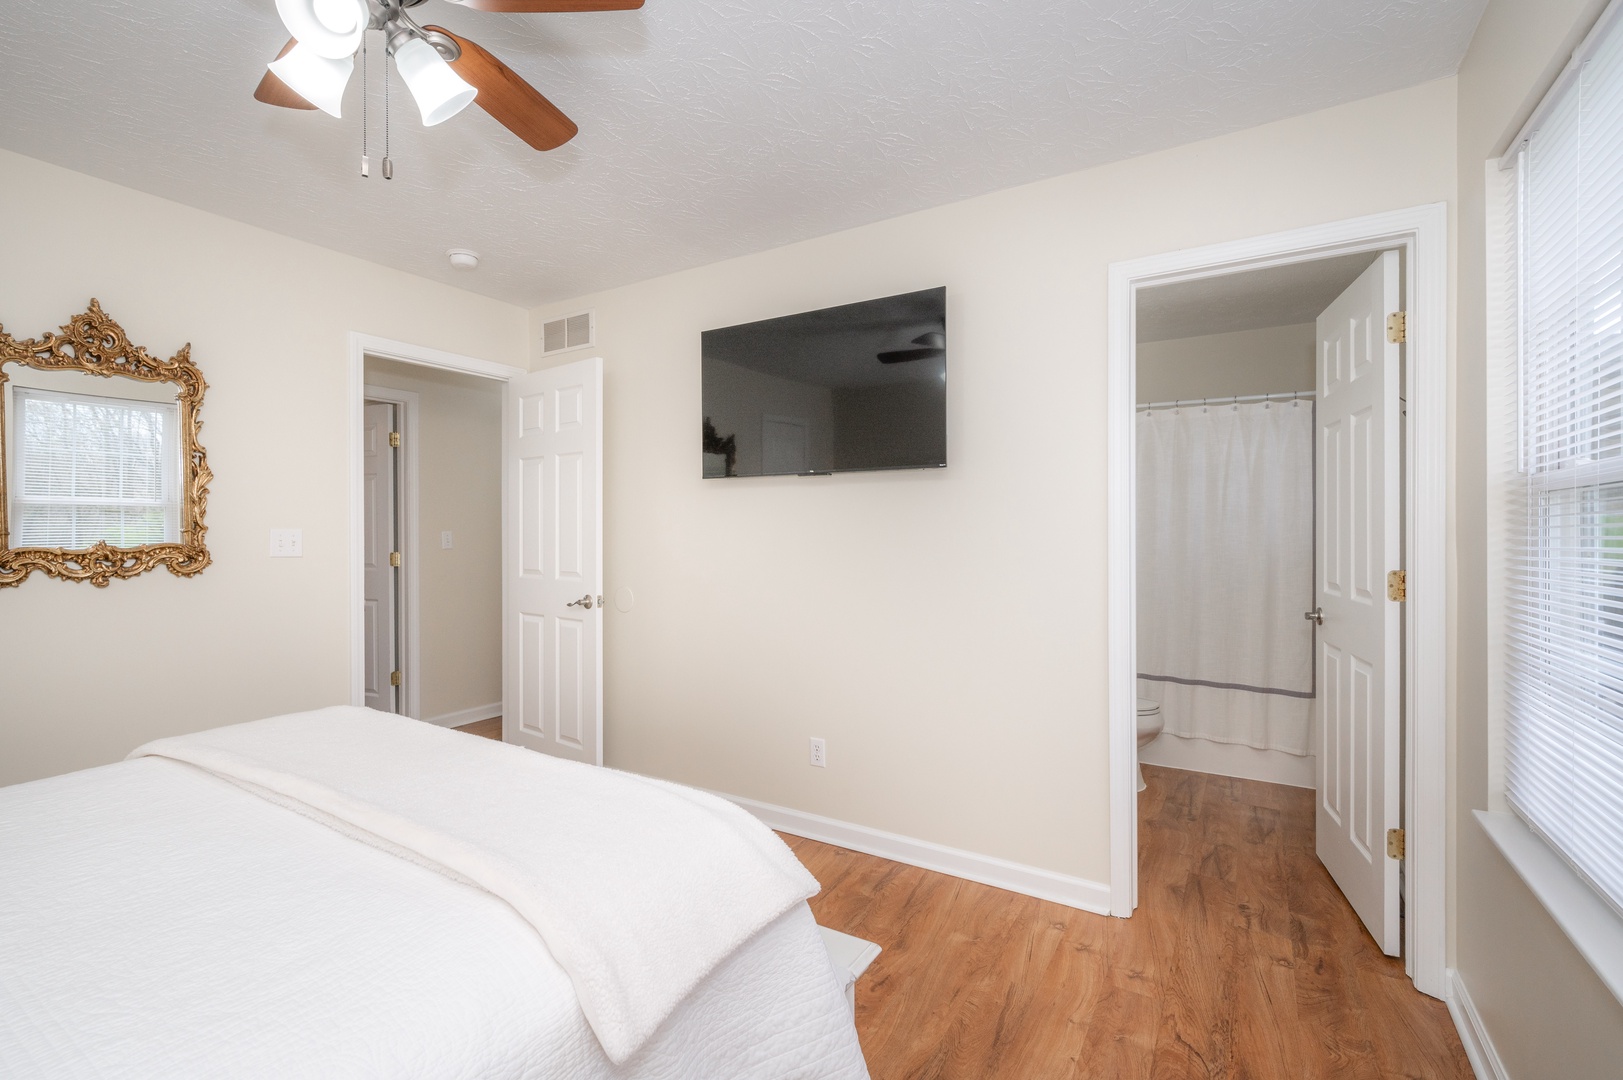 The upper-level queen suite boasts a Smart TV & private ensuite